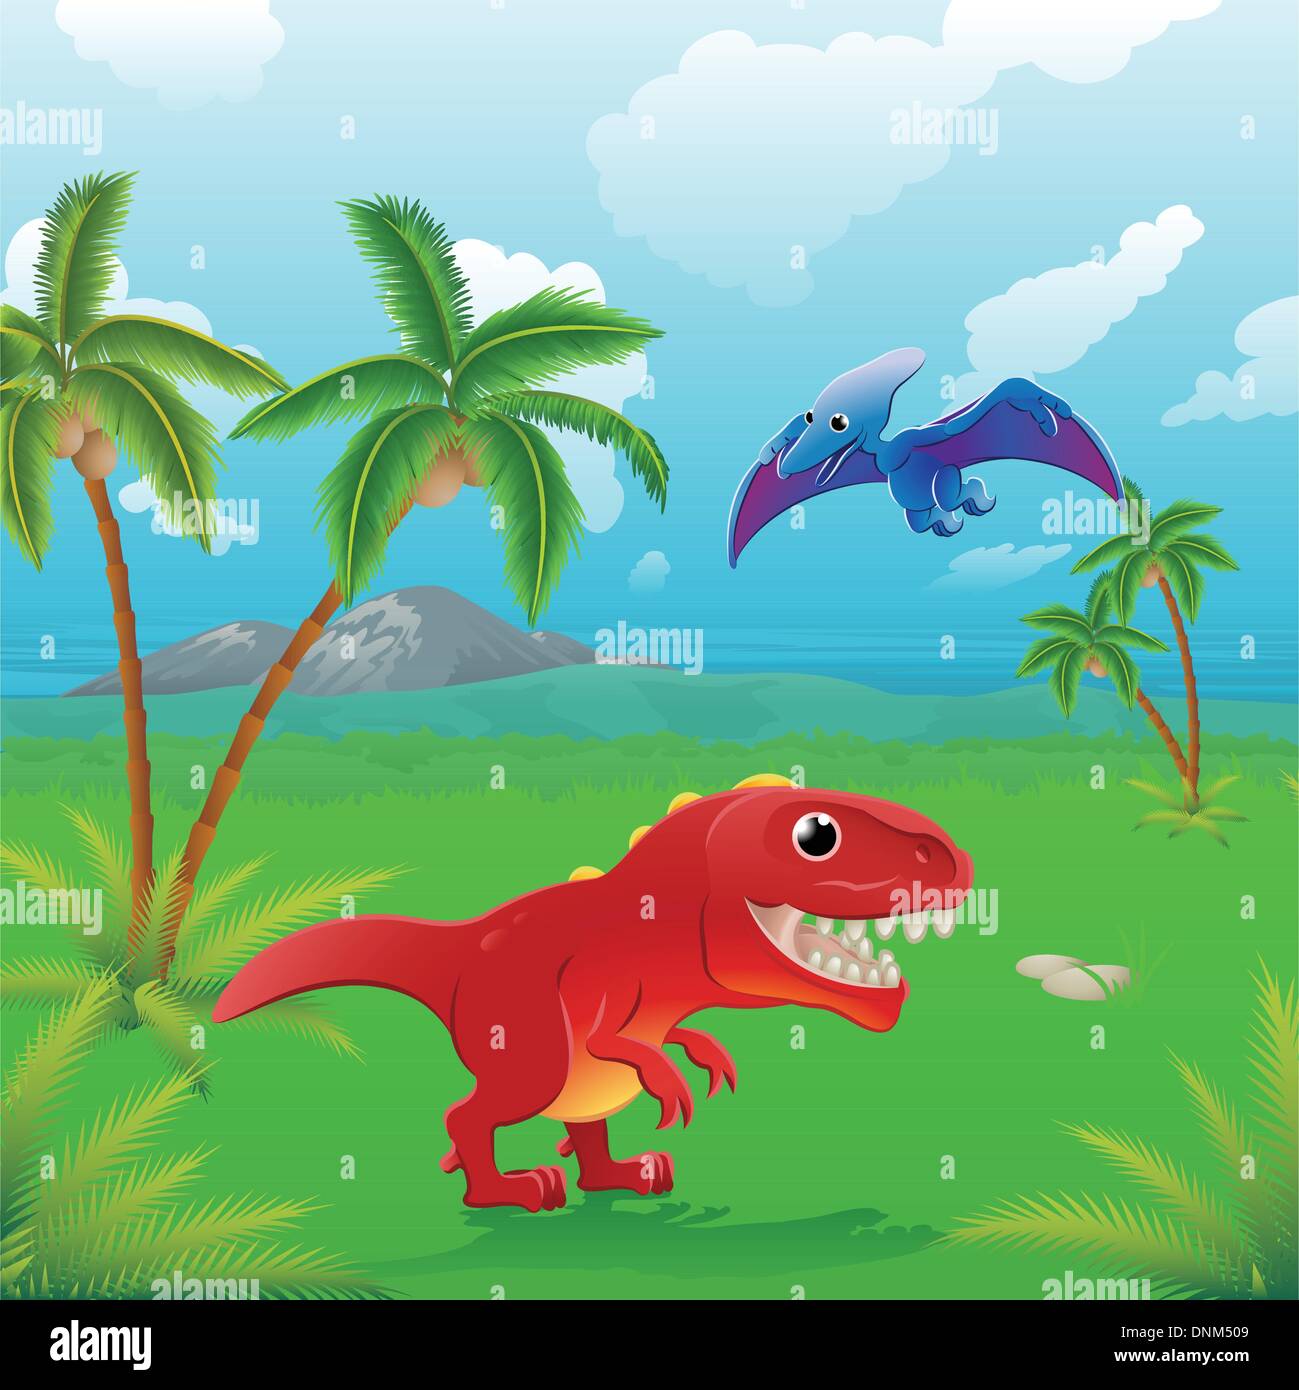 Cute dinosaurs in prehistoric scene. Series of three illustrations that can be used separately or side by side to form panoramic Stock Vector